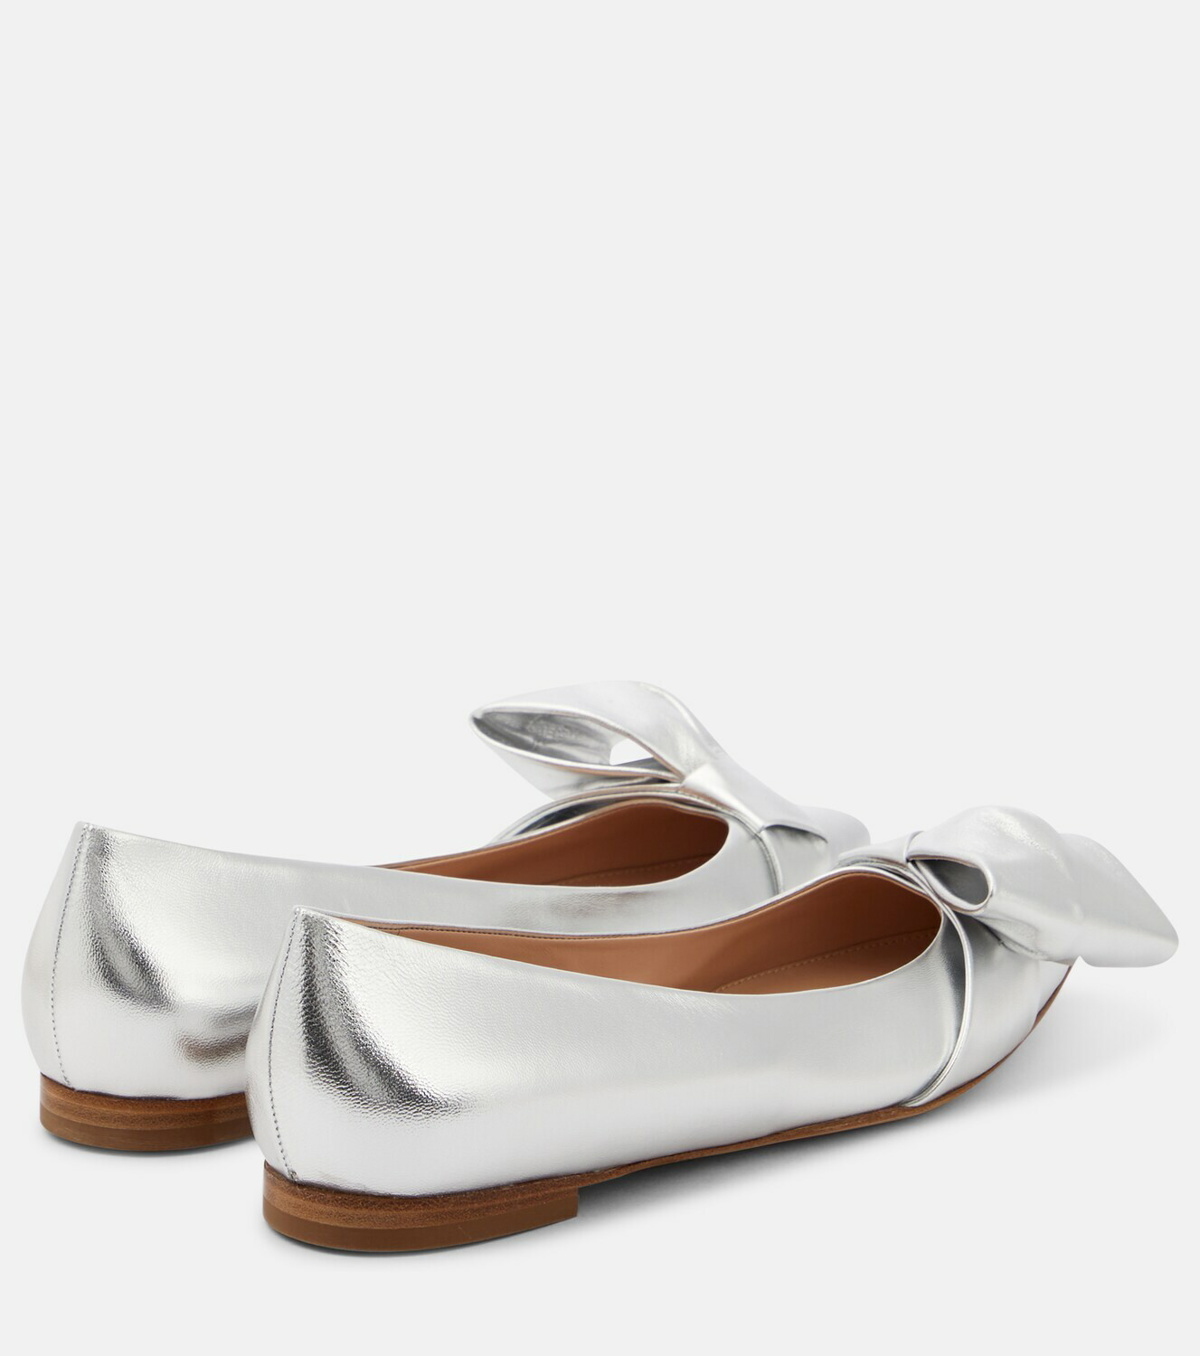 Gianvito Rossi Bow-embellished leather ballet flats Gianvito Rossi